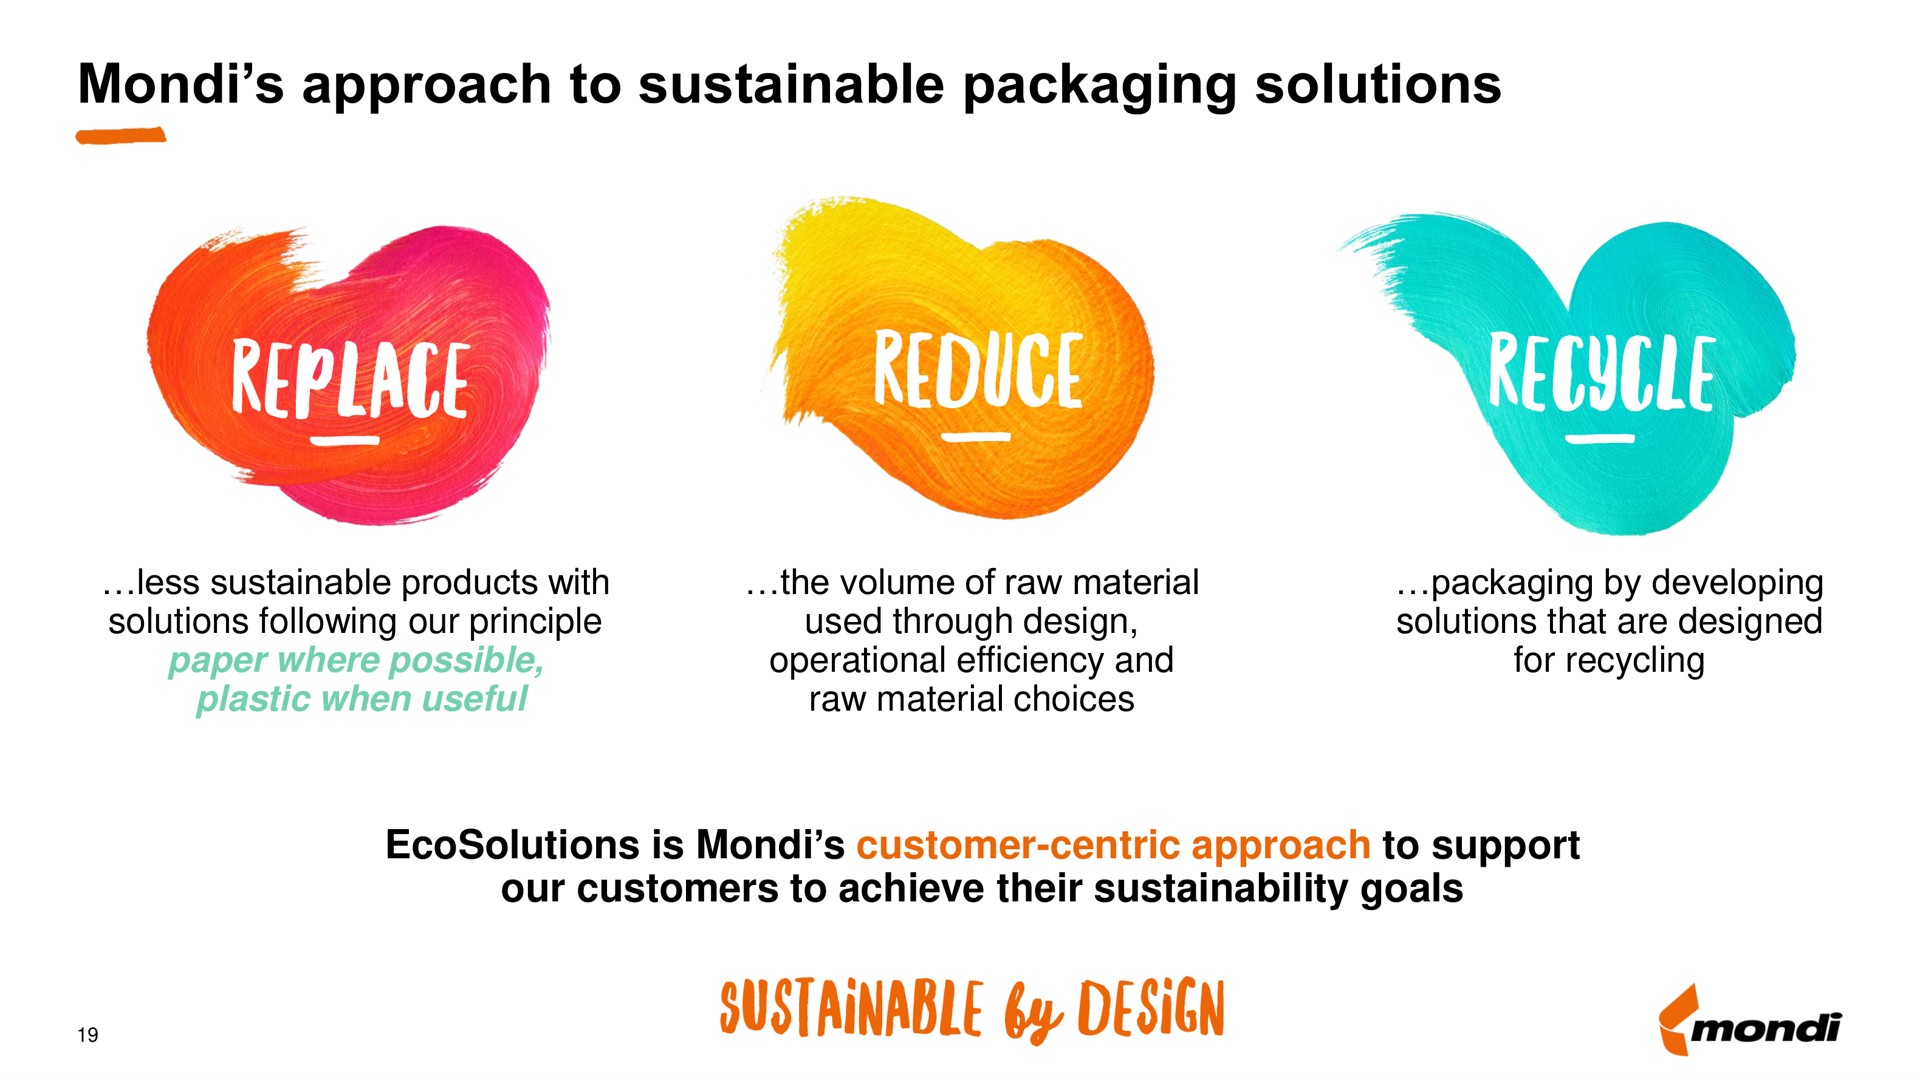 approach to sustainable packaging solutions | Mondi